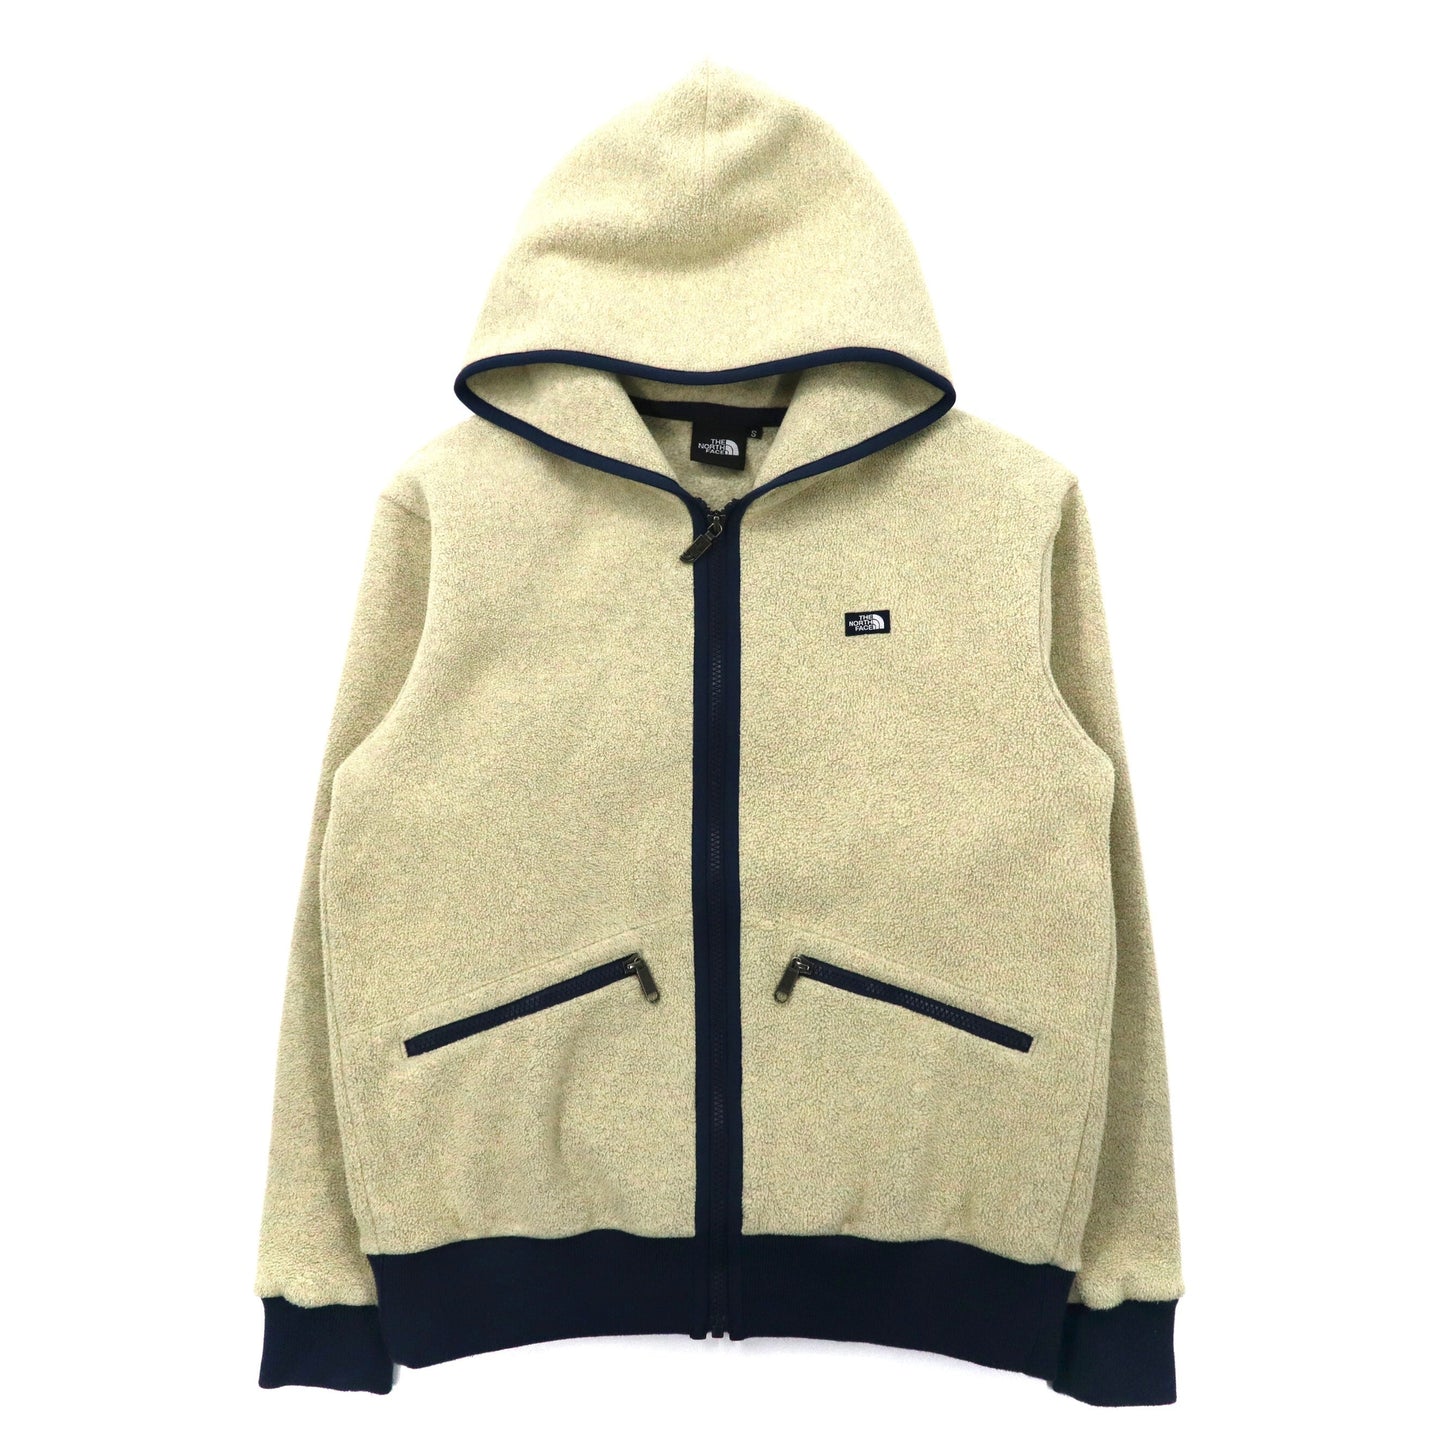 THE NORTH FACE FLEECE HOODIE S White polyester ARMADILLA FULL ZIP 